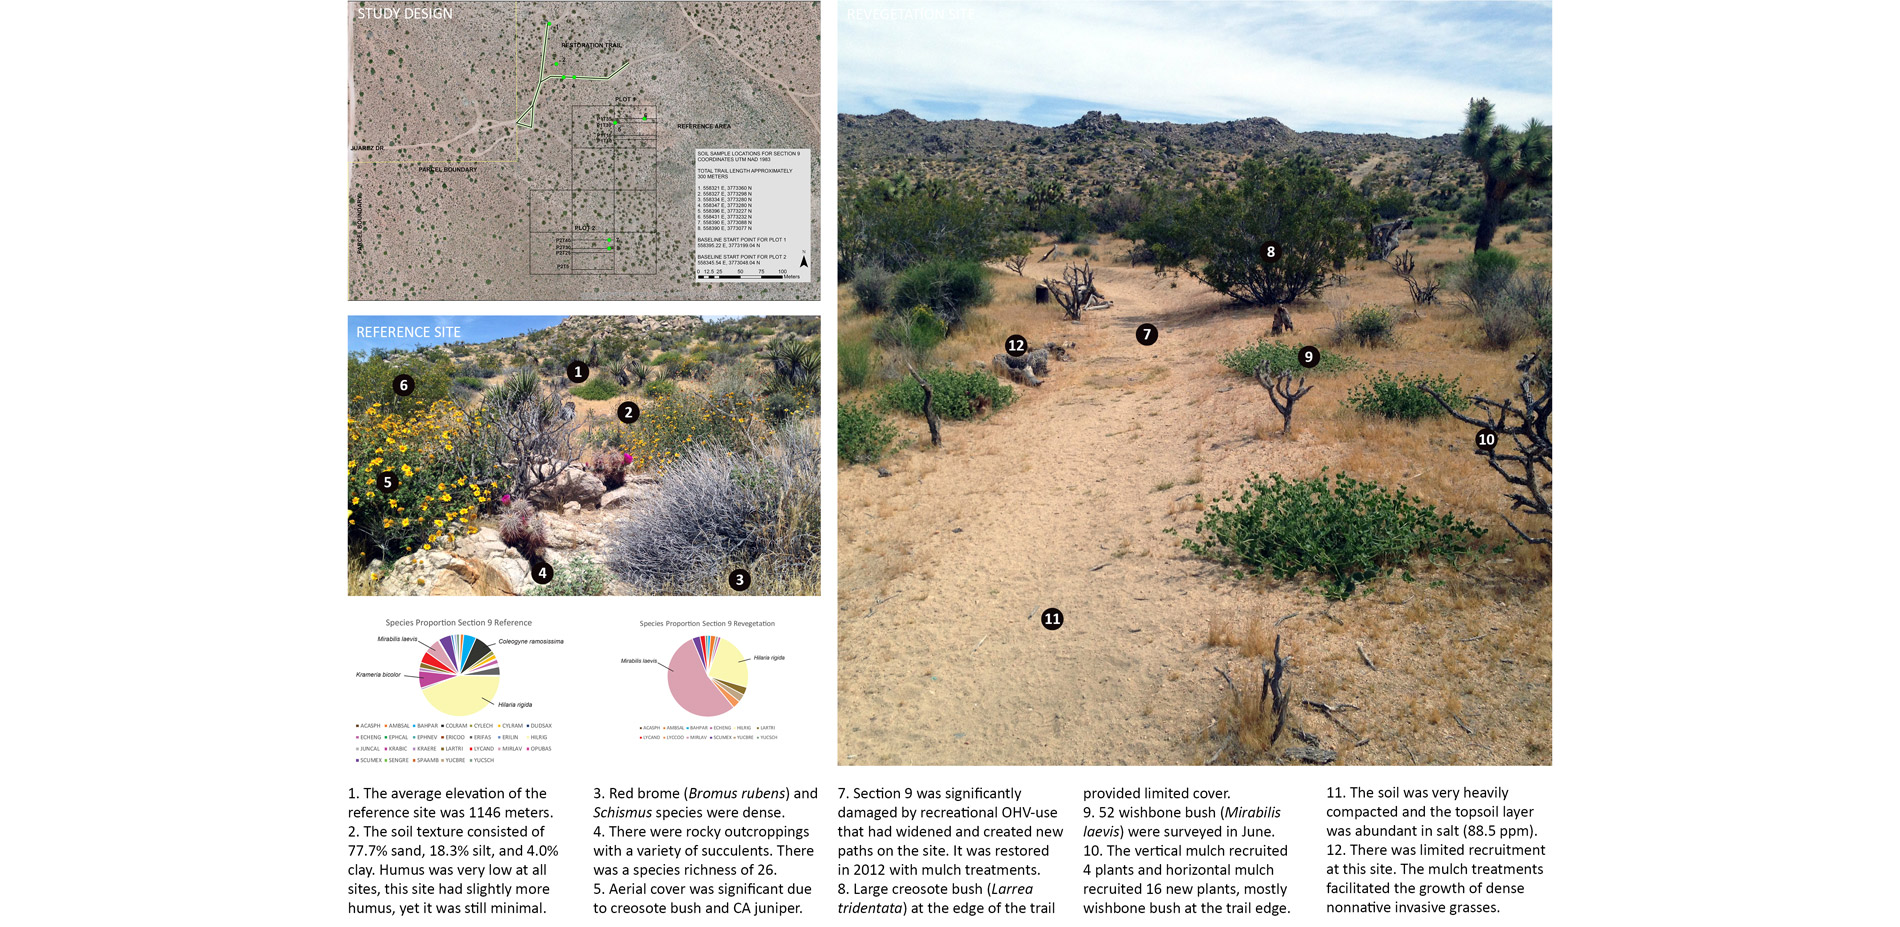 Section 9 revegetation site was restored in 2012 with mulch treatments by the Mojave Desert Land Trust.…